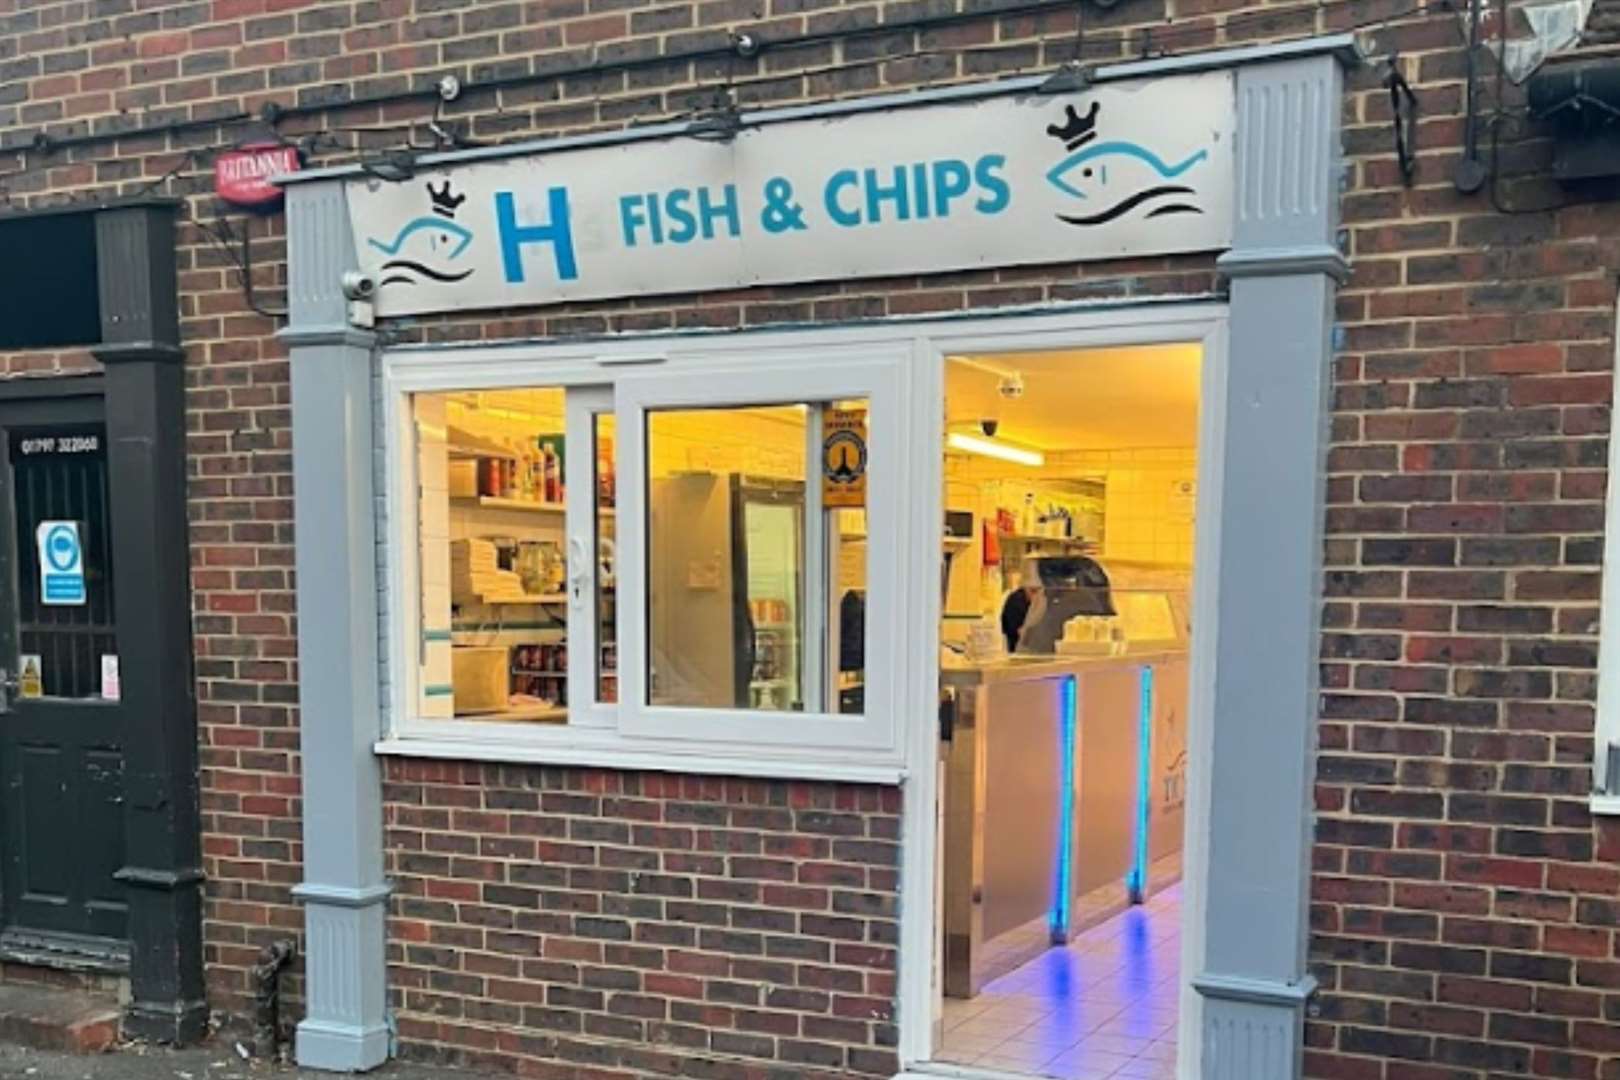 TK's branch in Lydd was sold in August and is now called H Fish and Chips